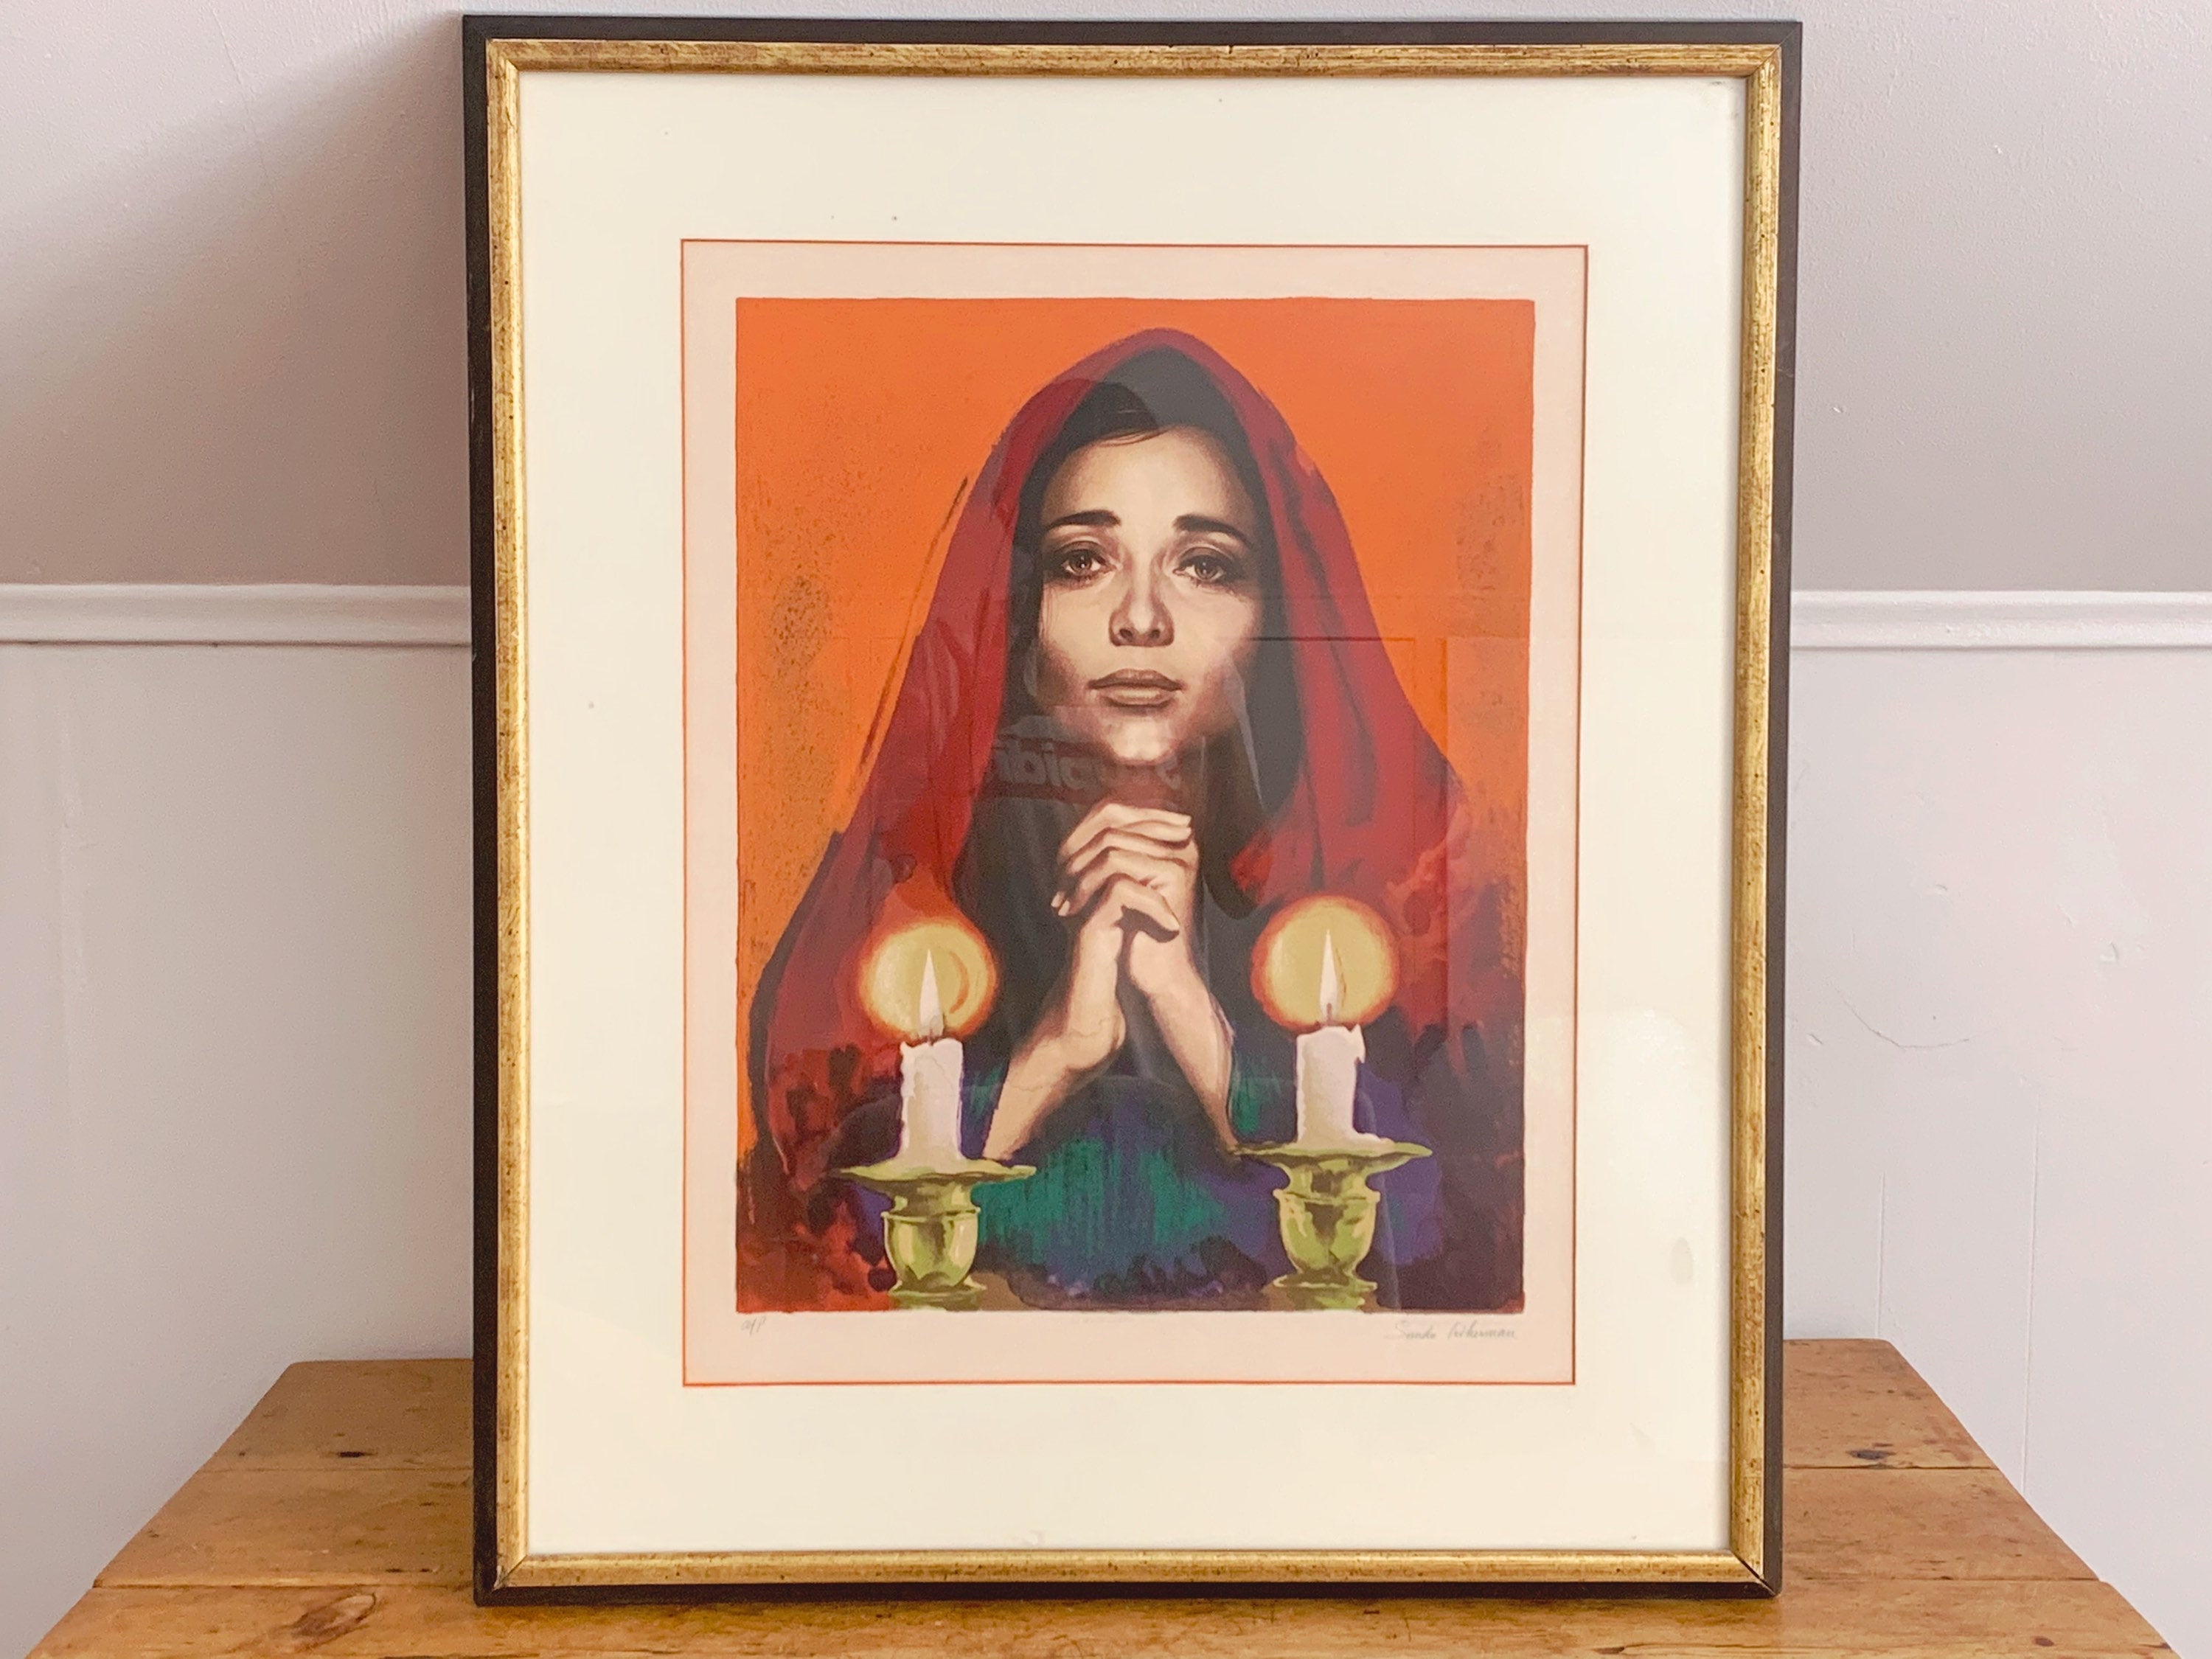 Vintage Circa 1975 "Shabbas Candles XIV A" Lithograph by Sandu Liberman | Signed and Numbered AP